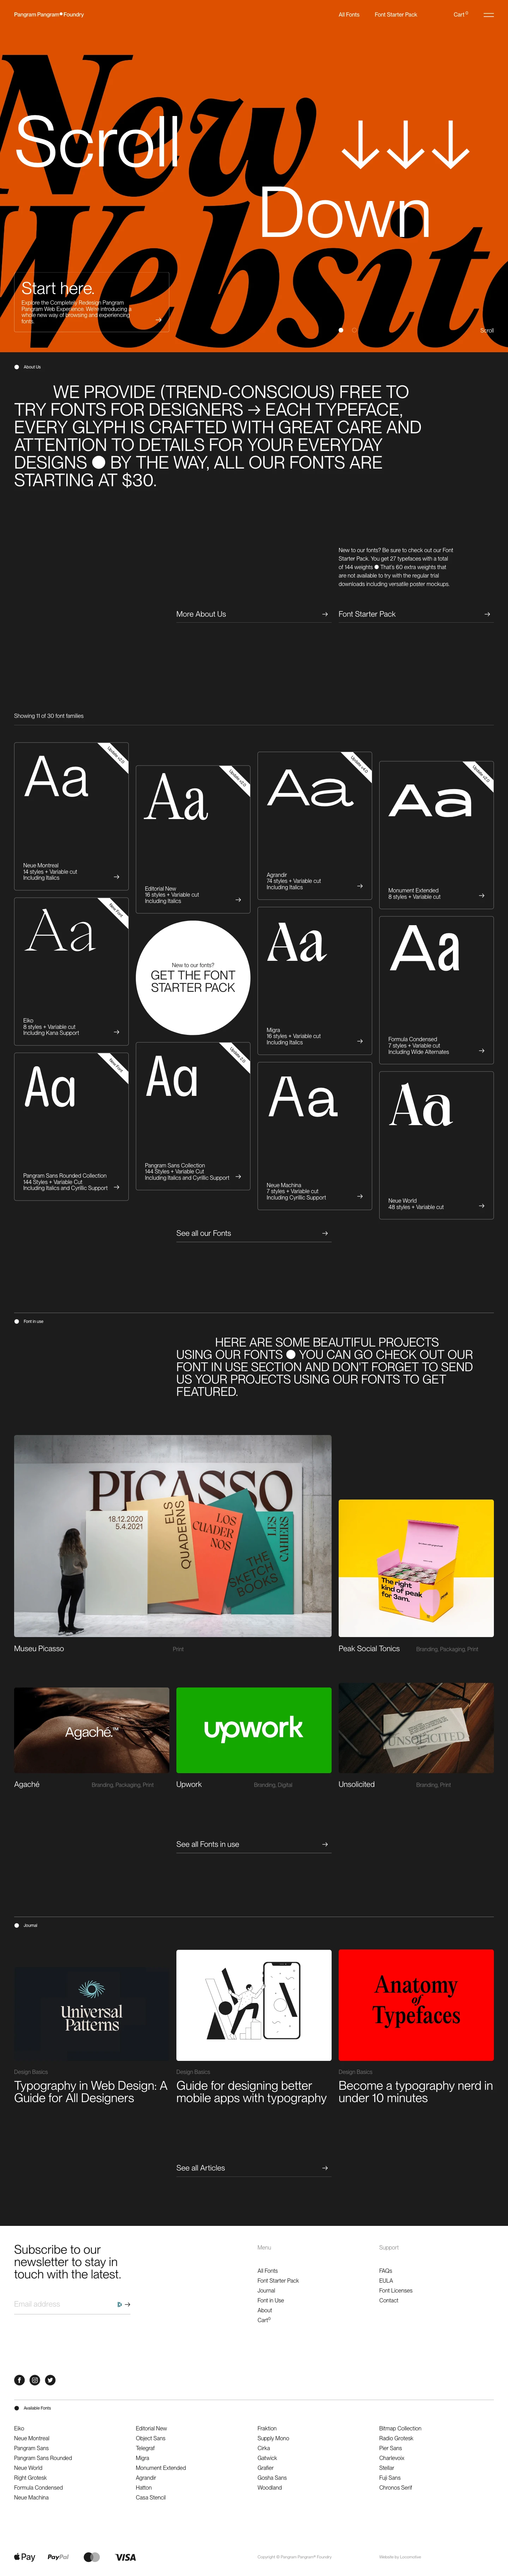 Pangram Pangram Foundry Landing Page Example: We are dedicated to making quality typefaces that can be used in everyday designs and projects. All our fonts are free to try.